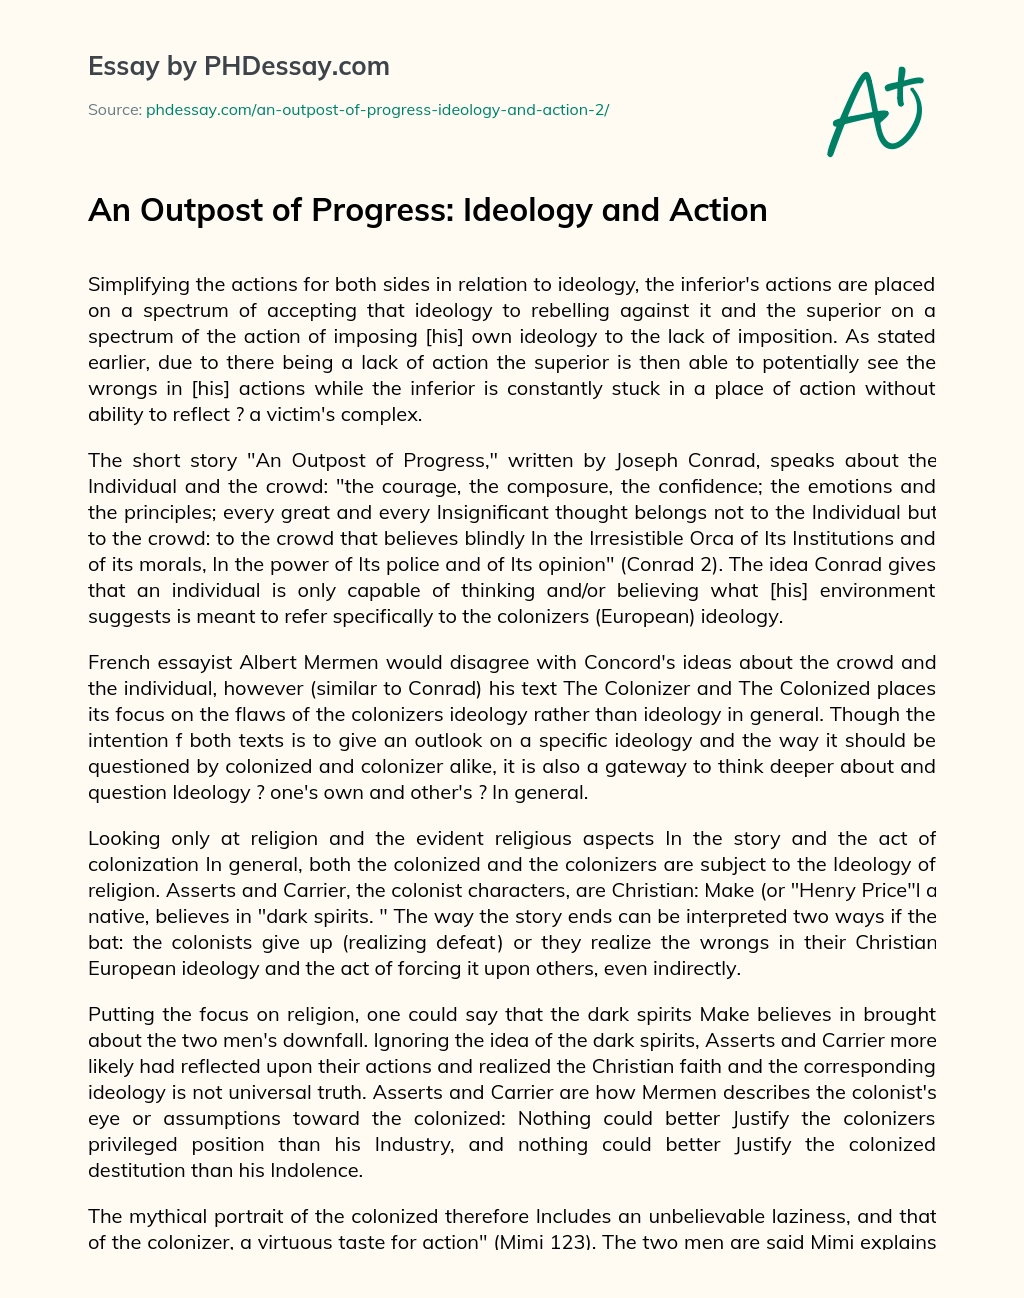 An Outpost of Progress: Ideology and Action essay